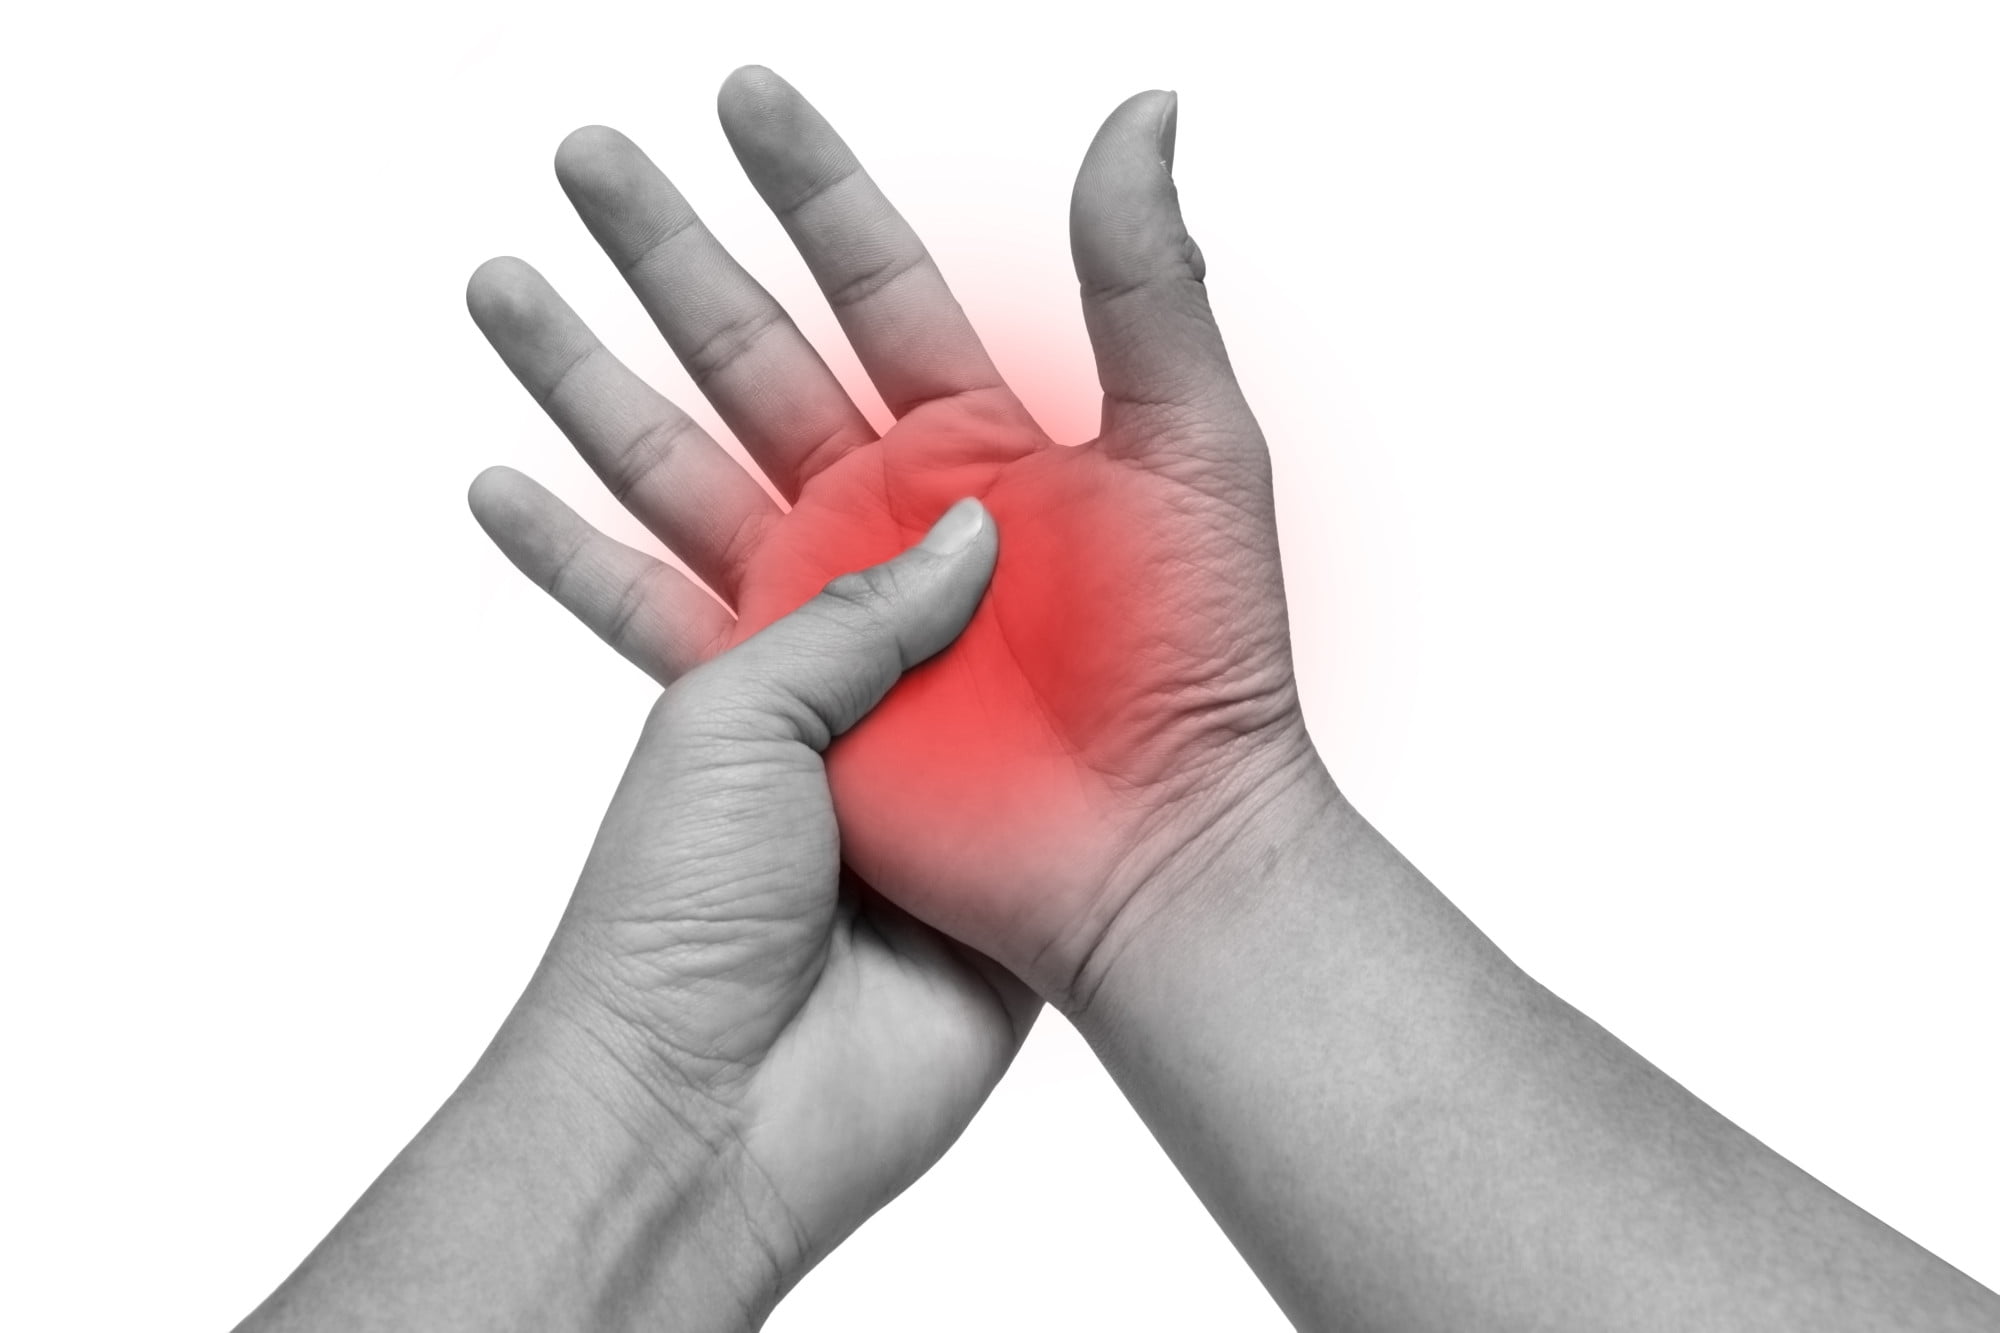 Living with chronic pain and joint immobility can seriously impact your quality of life. We take a look at how you can support recovery from joint injuries.